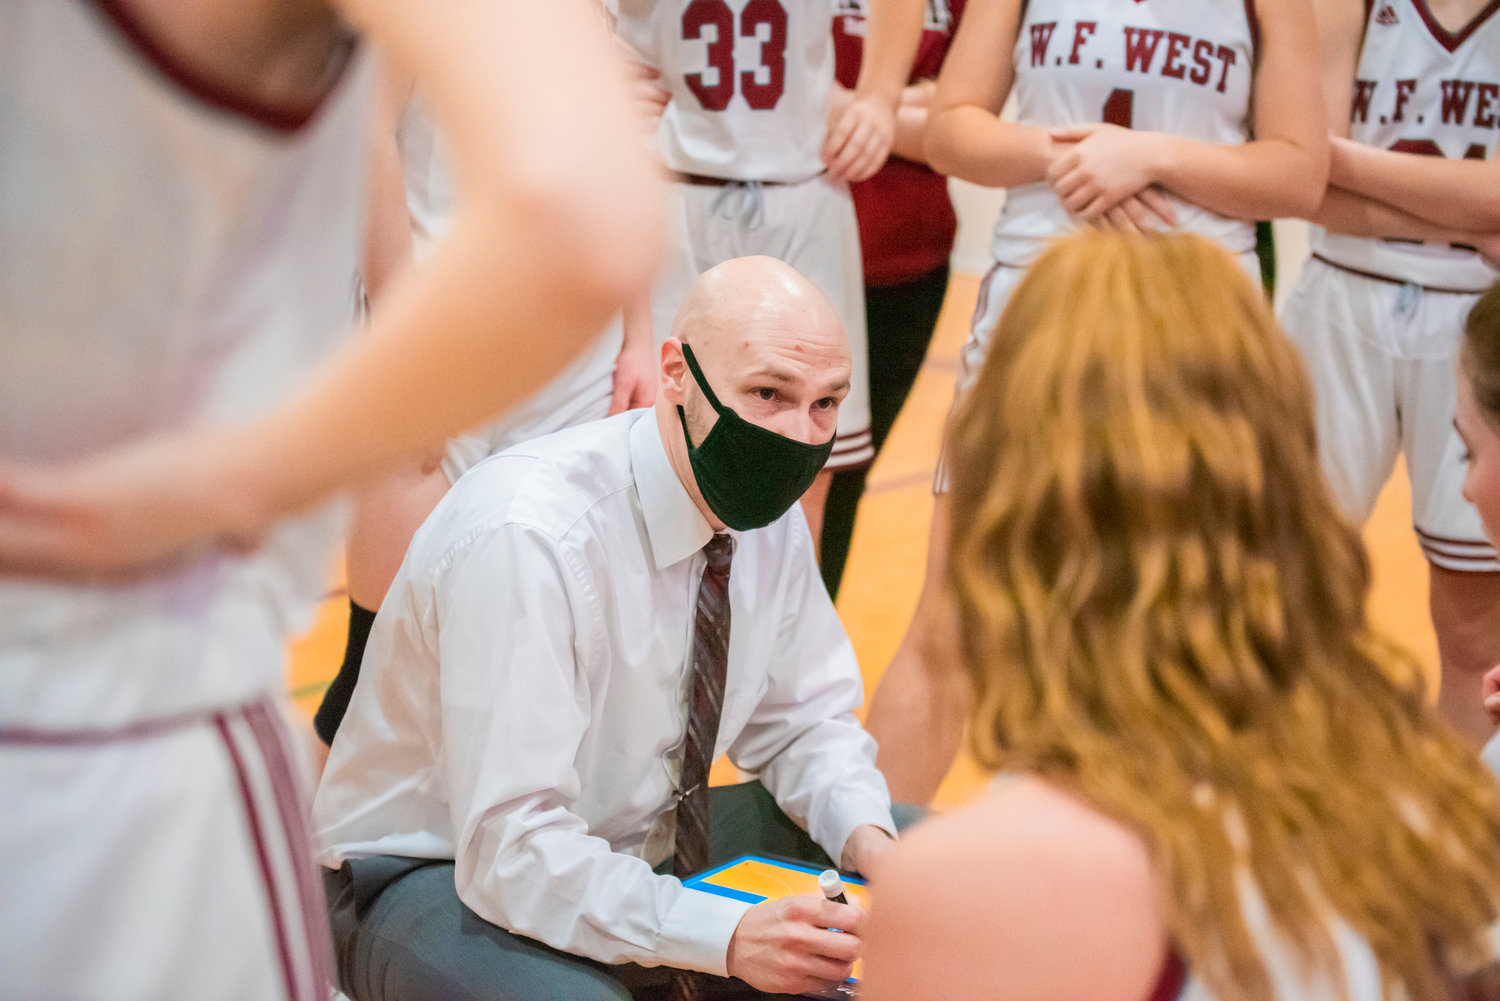 Bearcat Head Coach Kyle Karnofski talks to athletes courtside during a game at W.F. West Friday night.